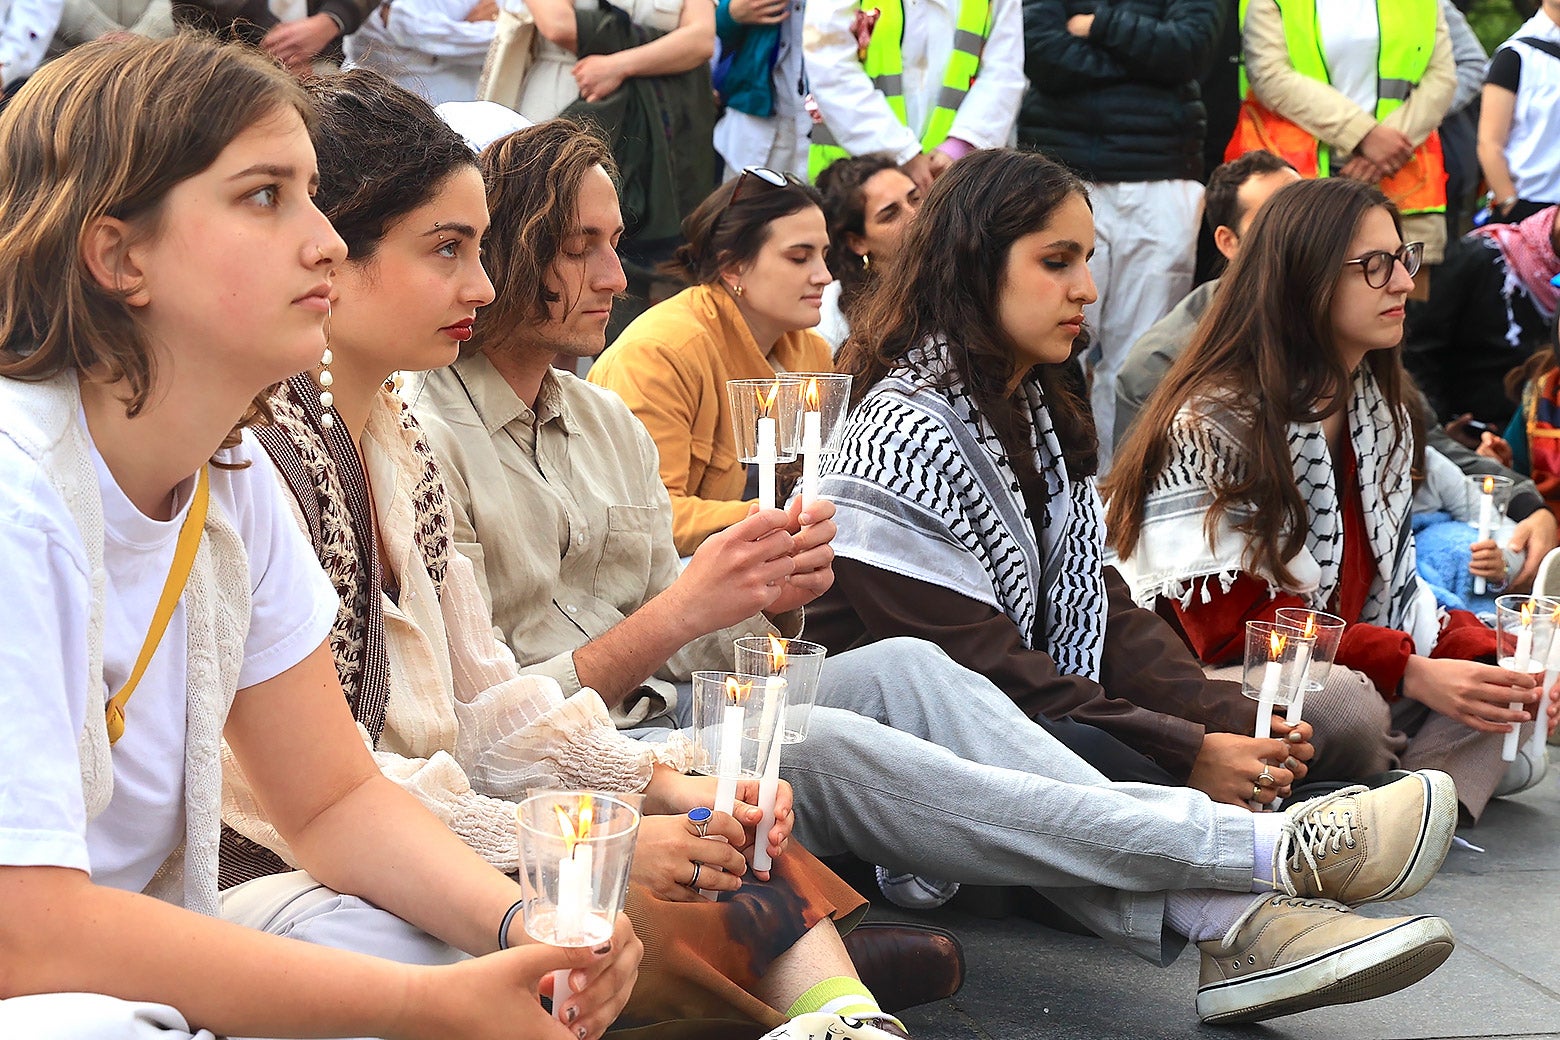 Seated Jews, young men and women, hold Shabbat candles; two of the women wear kaffiyeh draped over their shoulders.